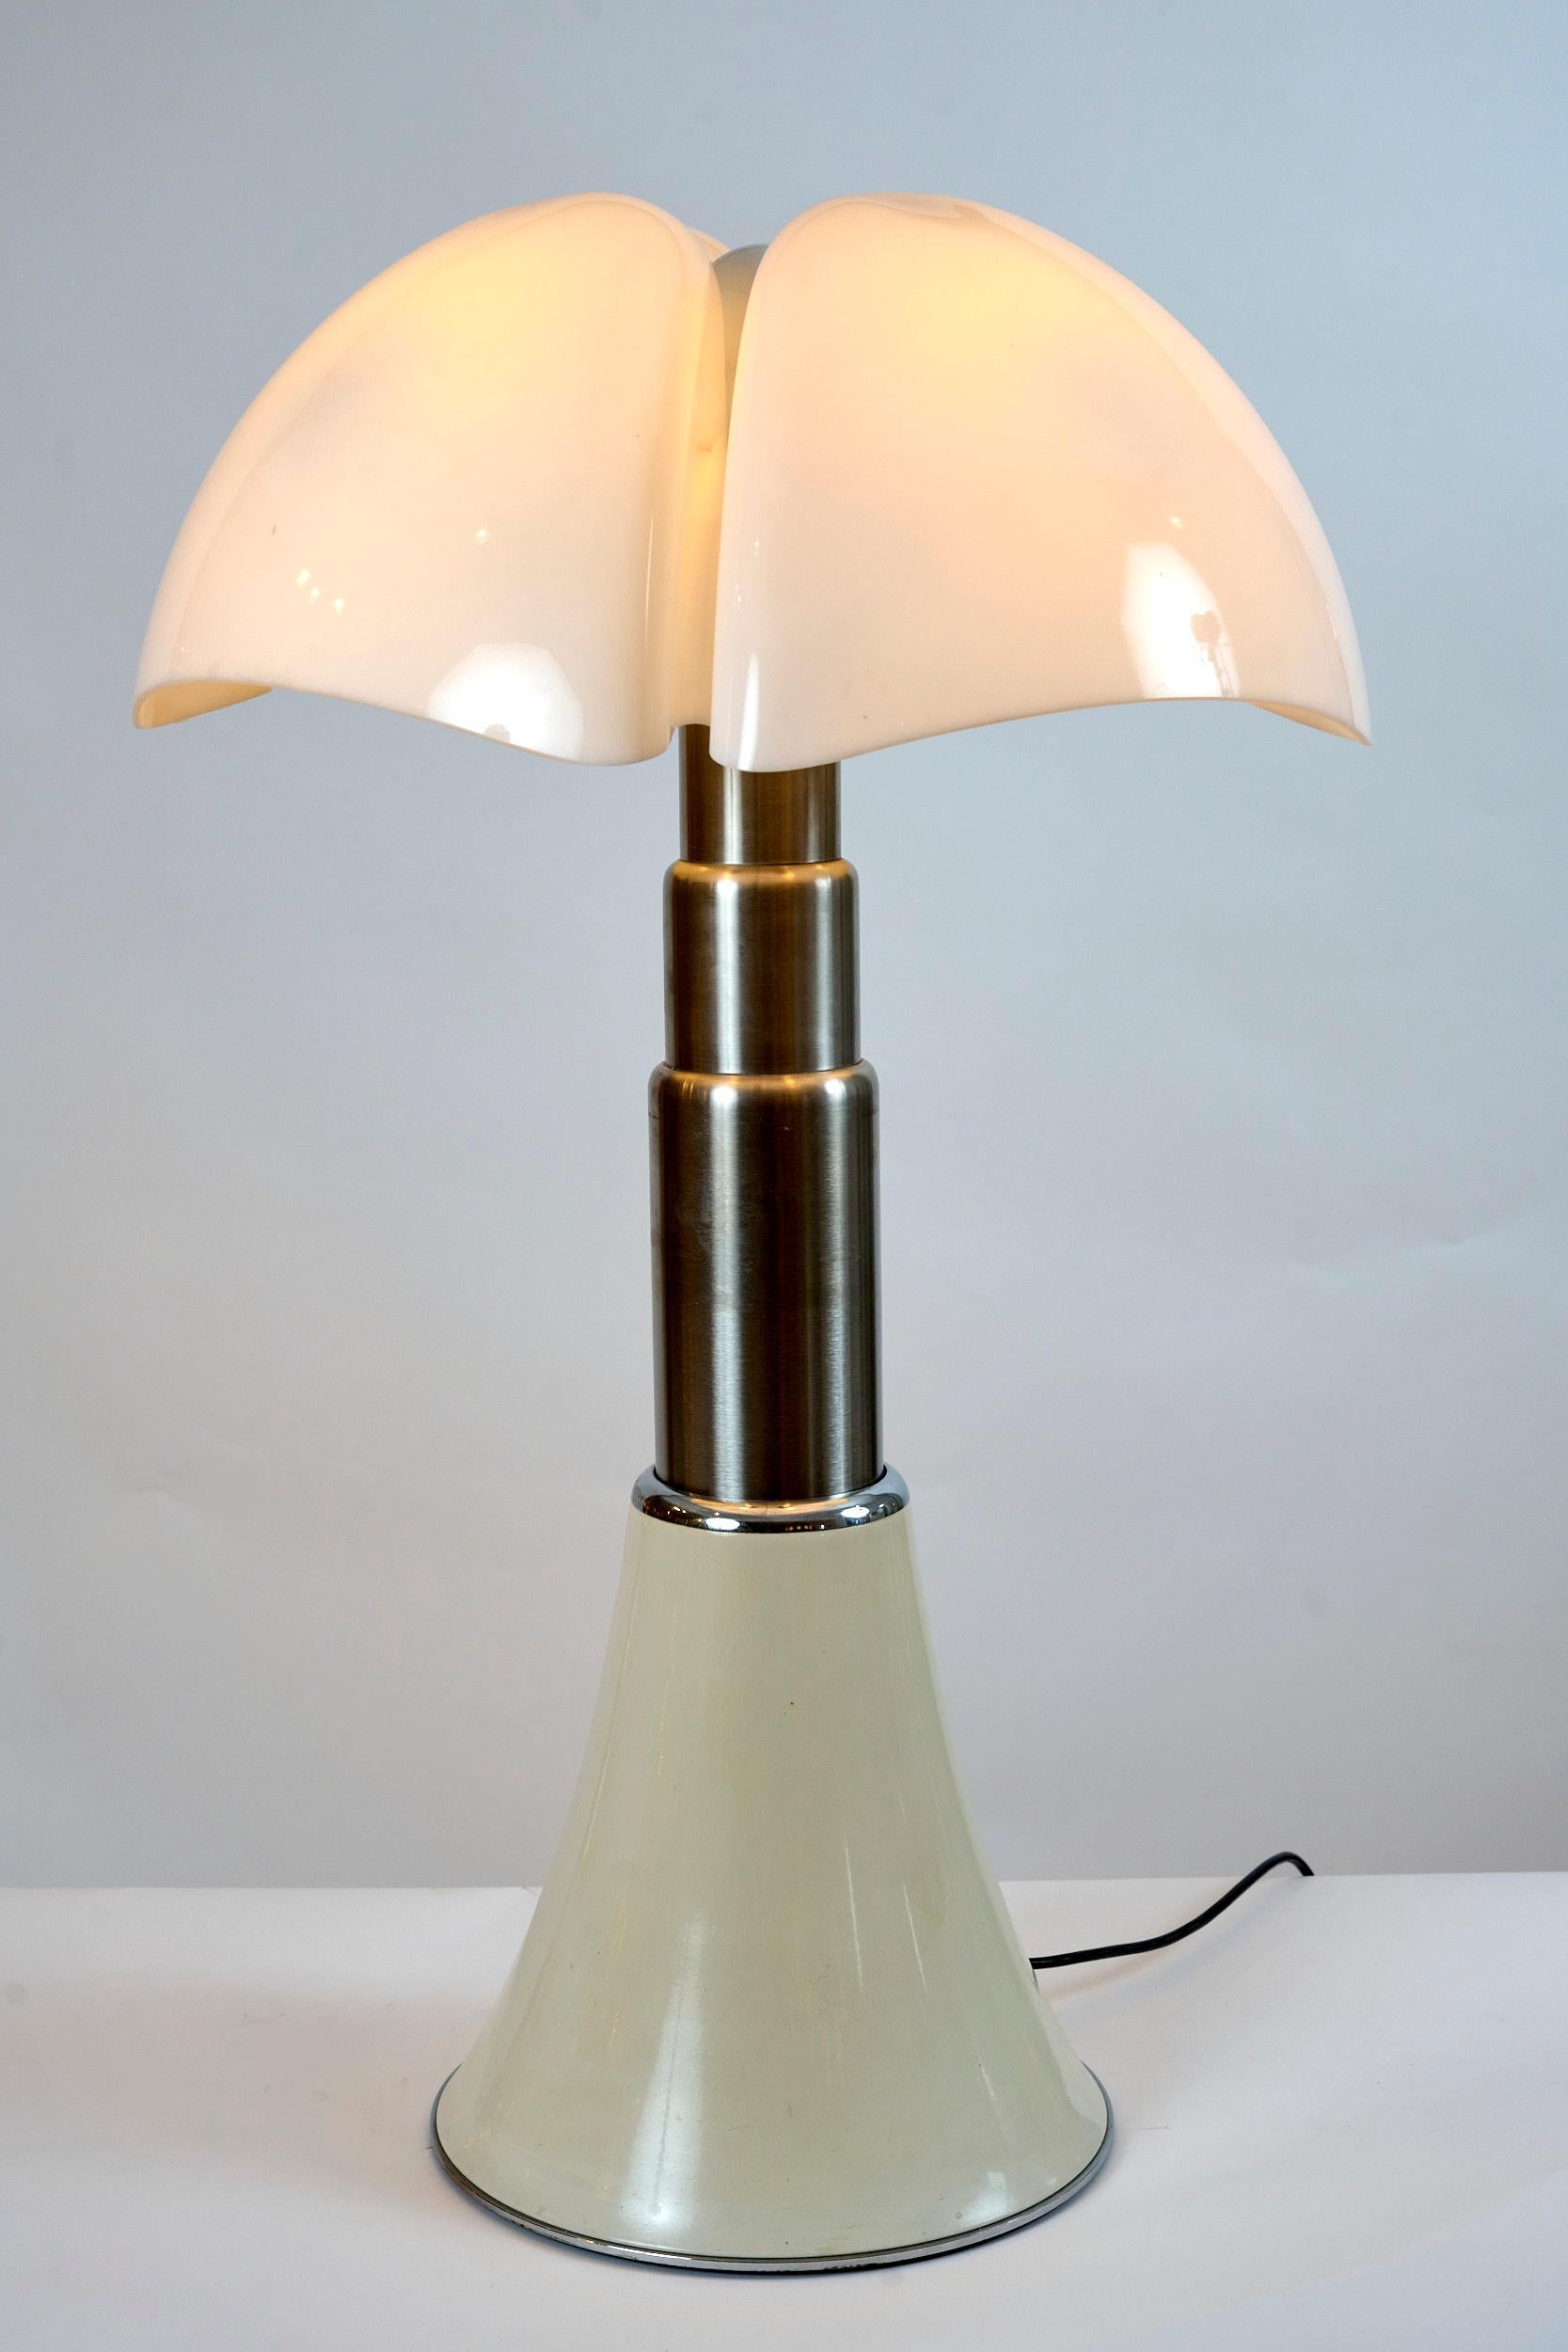 by Gae Aulenti for Martinelli Luce

Largest of this design telescopic from 66cm to 86cm. 

The light is in excellent vintage condition.


